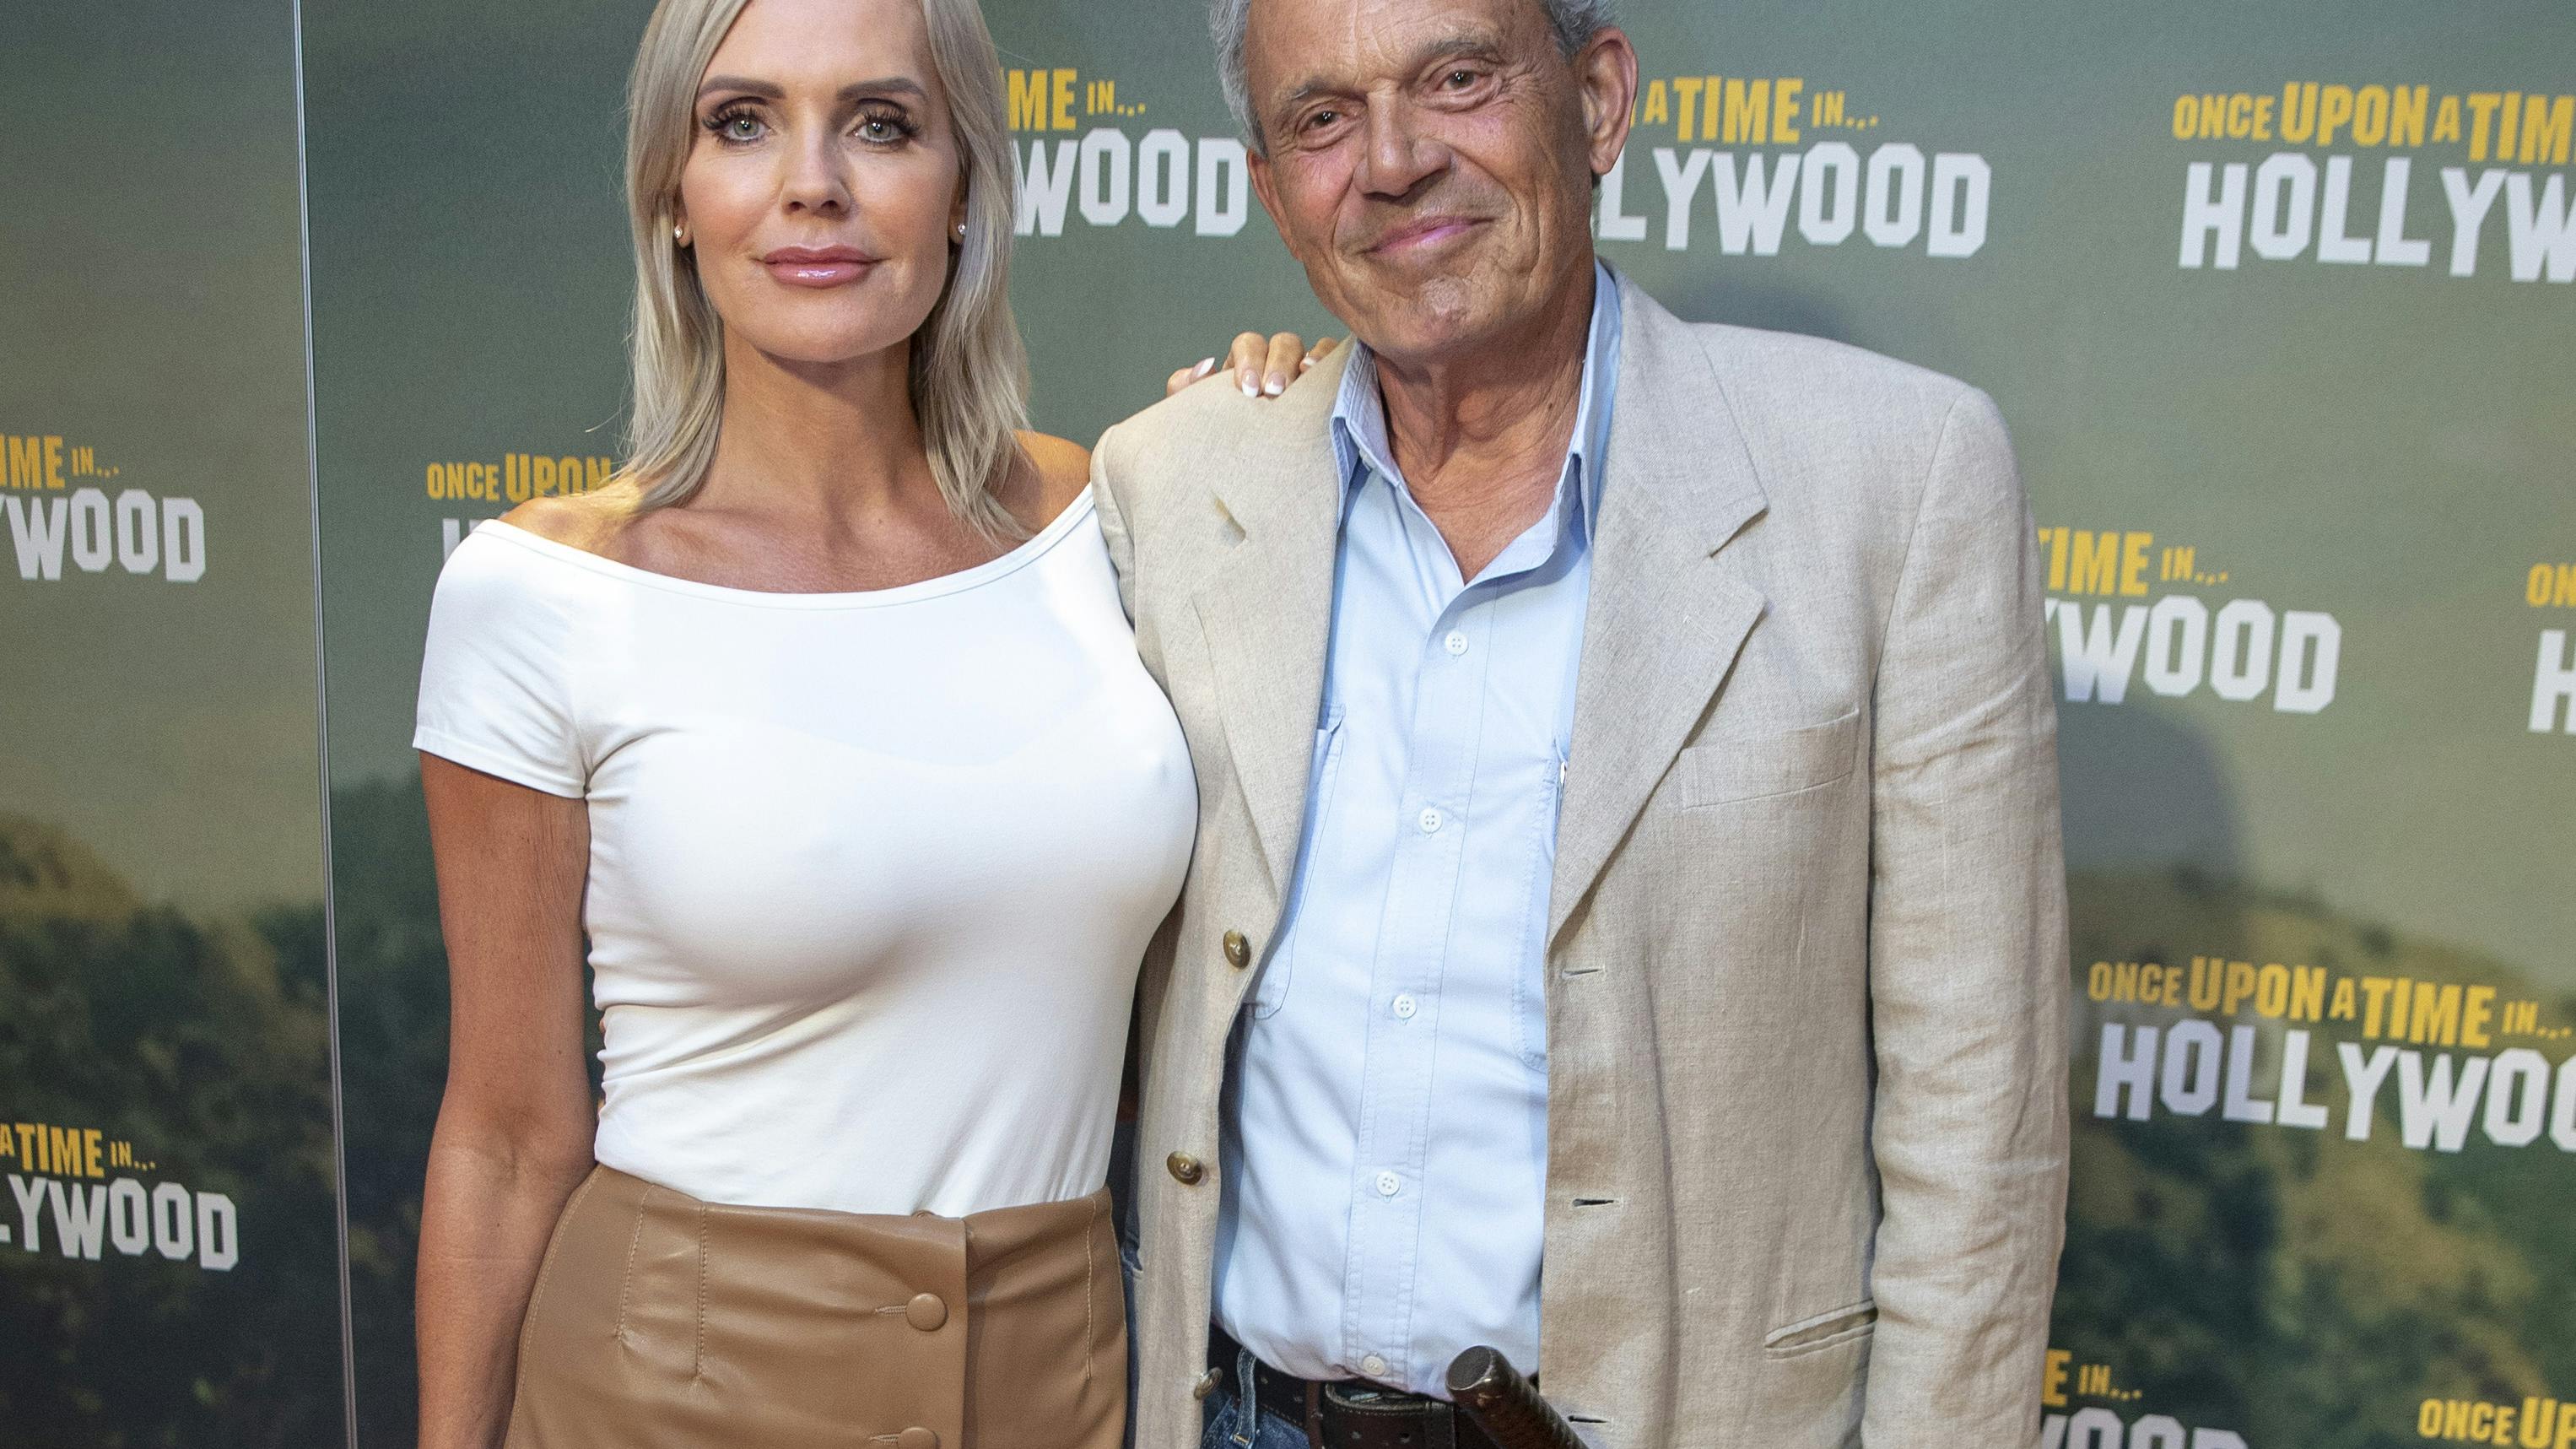 https://imgix.seoghoer.dk/media/article/20190813_dm_once_upon_a_time_in_hollywood_027.jpeg